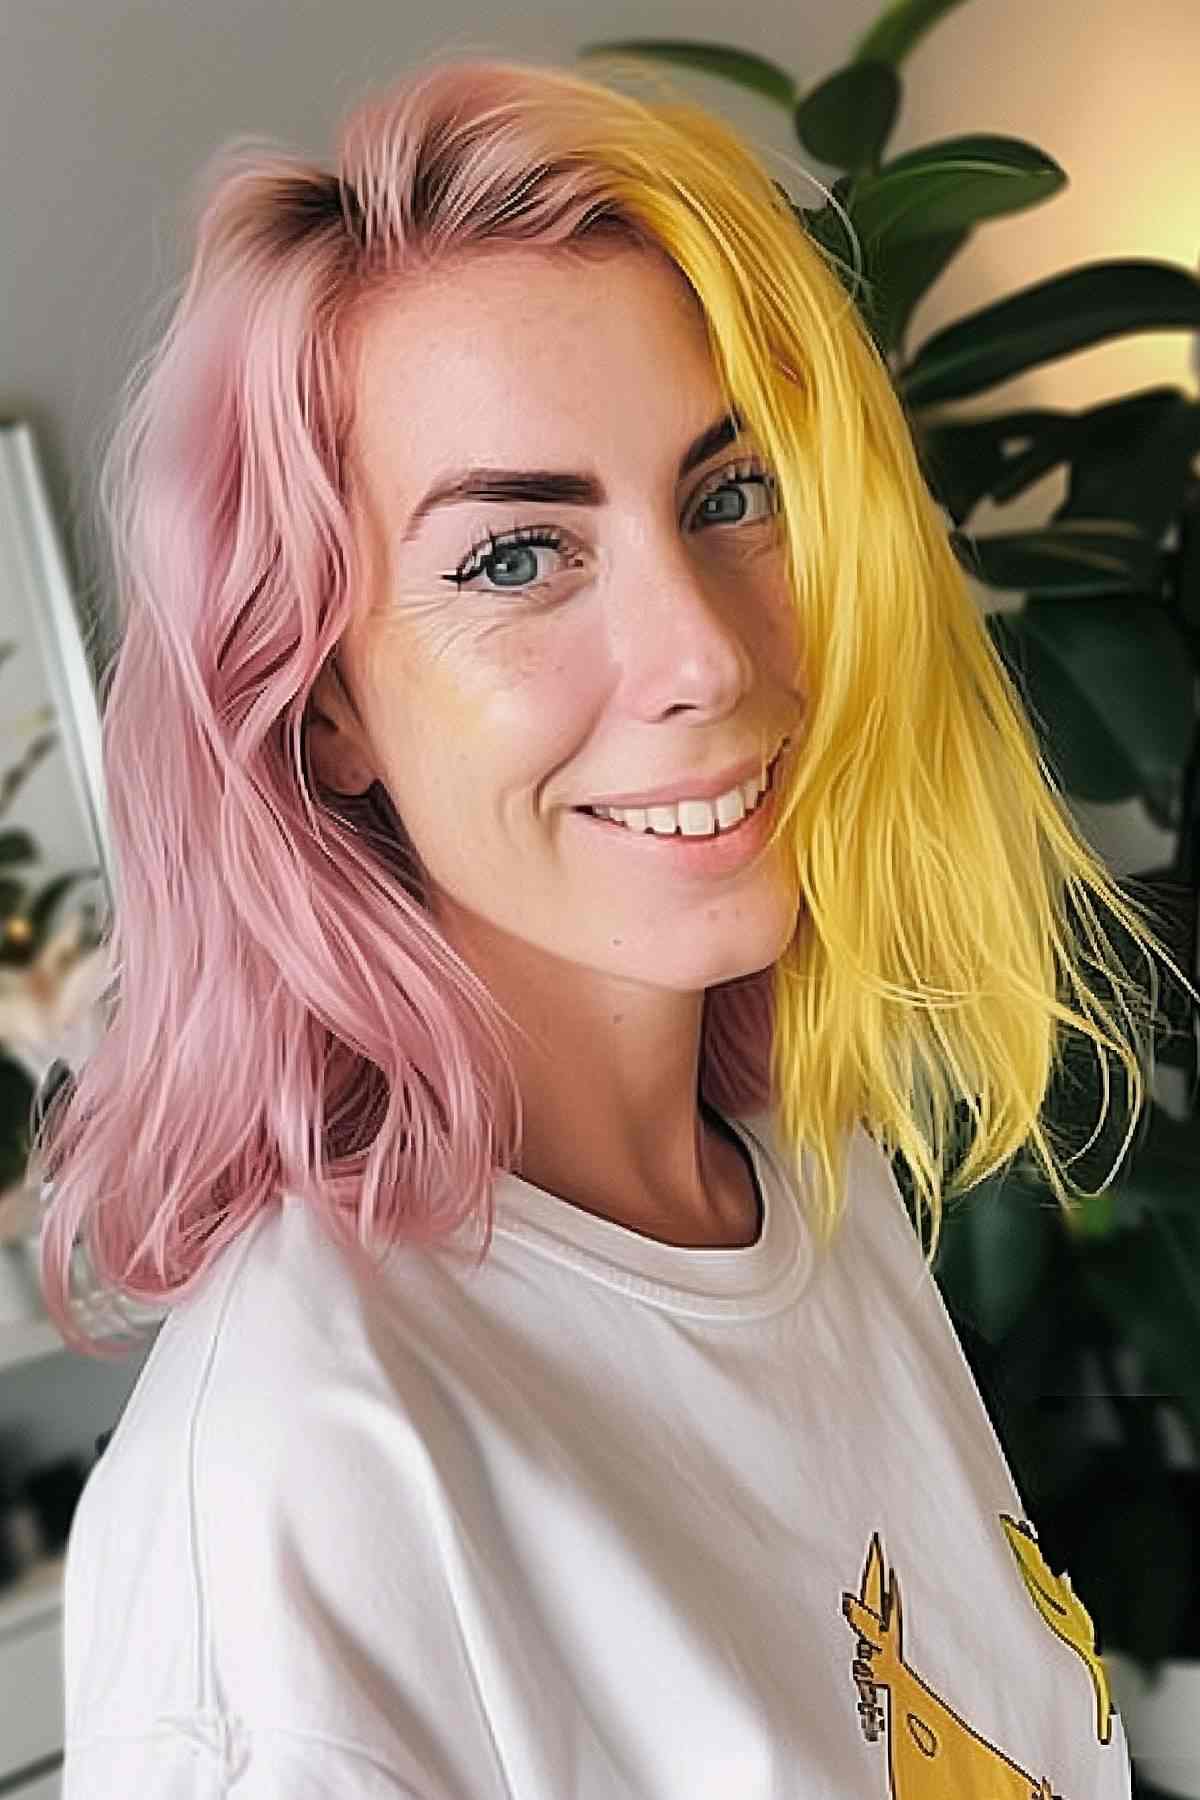 Short, tousled hair with yellow and pink highlights over a natural blonde, for a Gemini-inspired playful look.